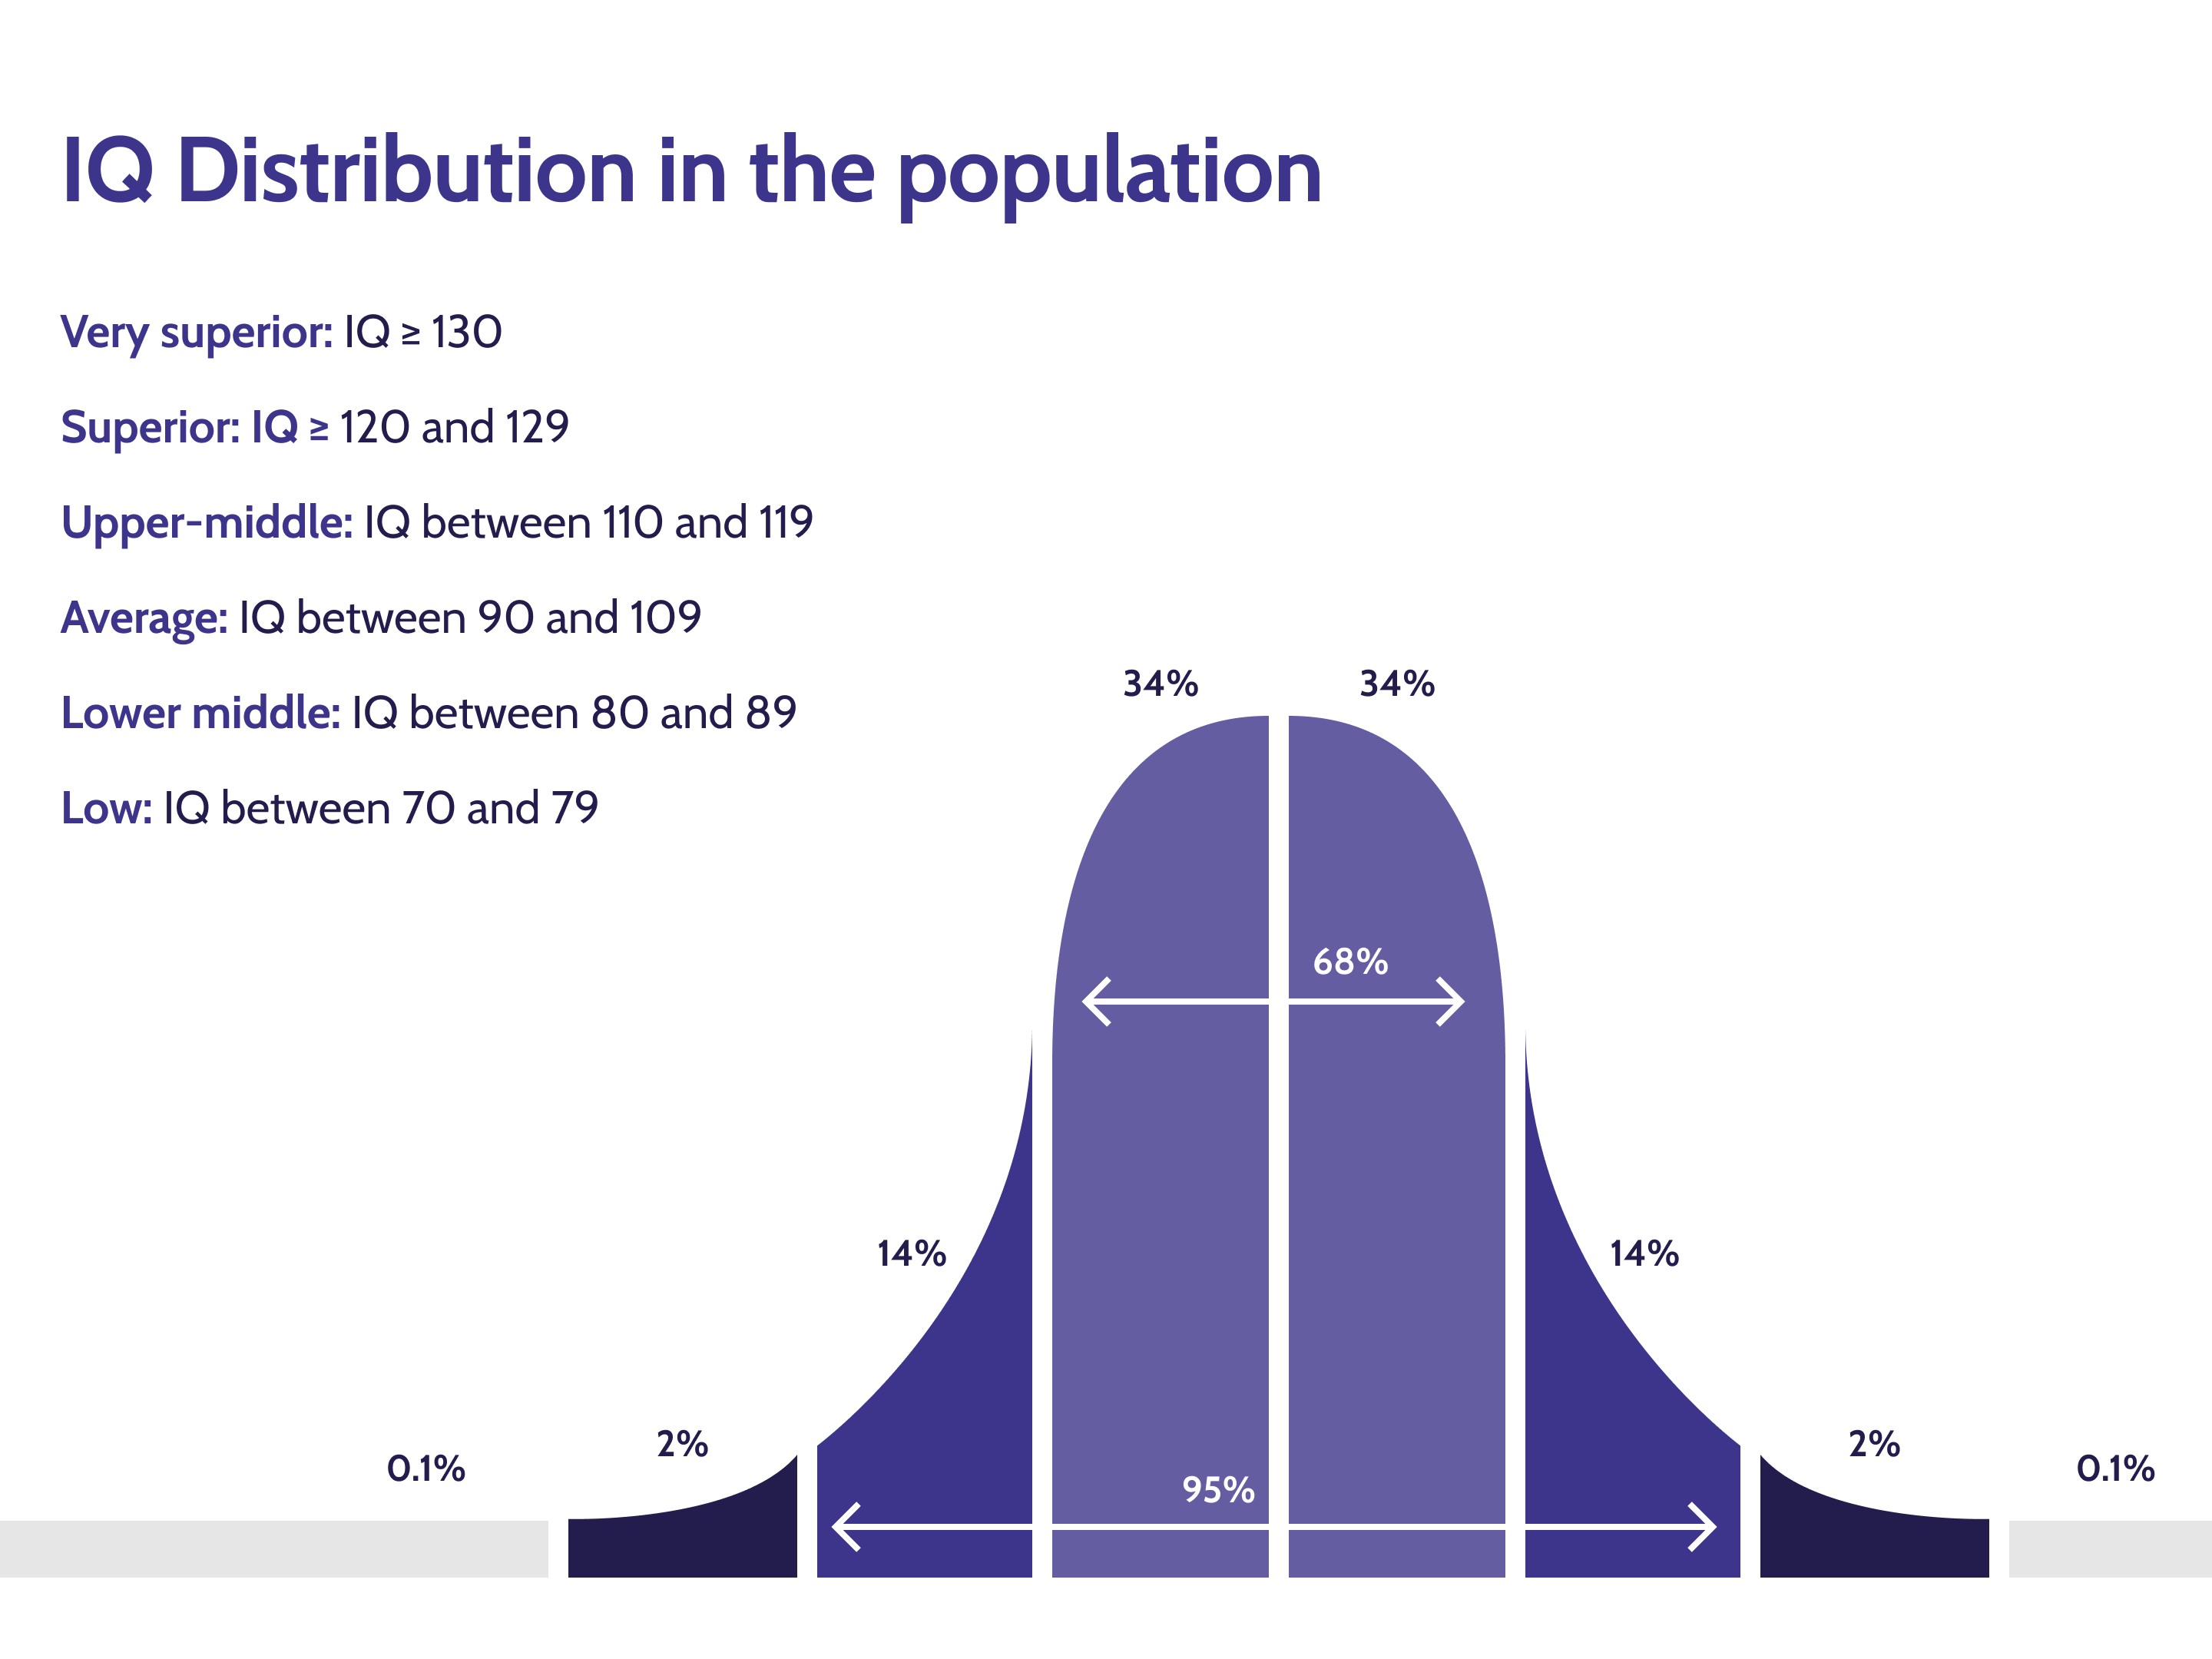 image distribution of IQ in the population in the world